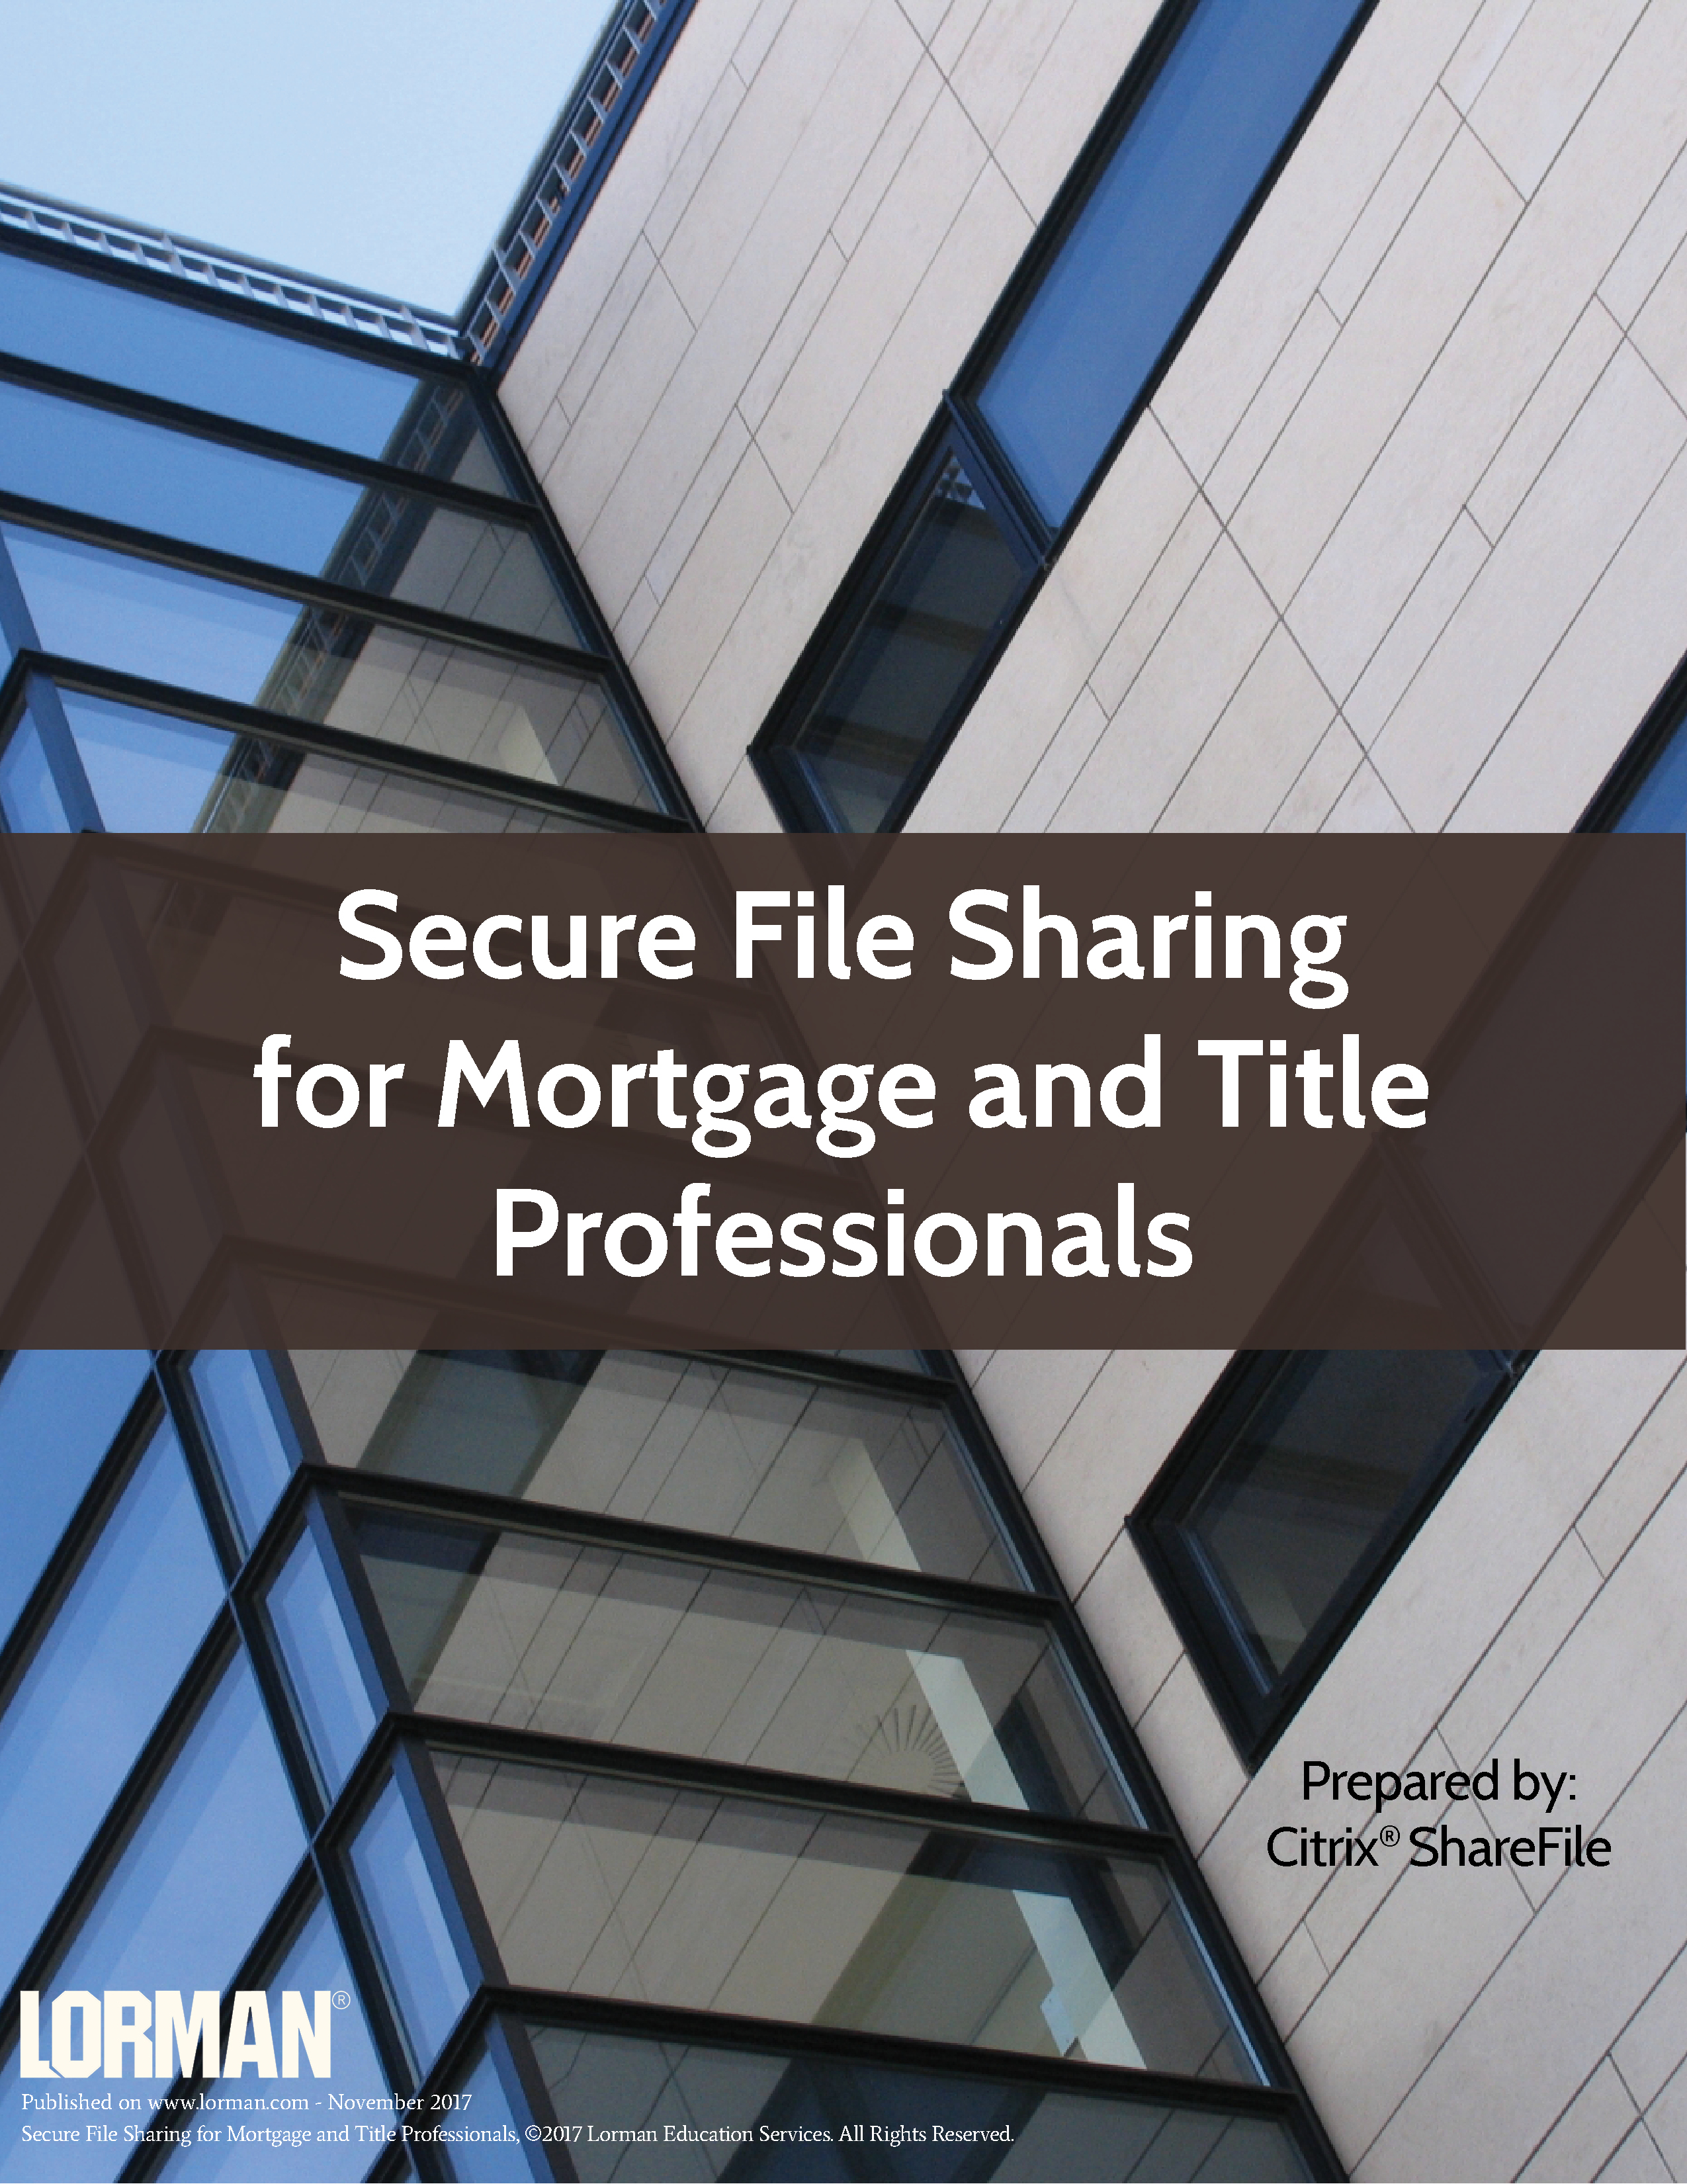 Secure File Sharing for Mortgage and Title Professionals